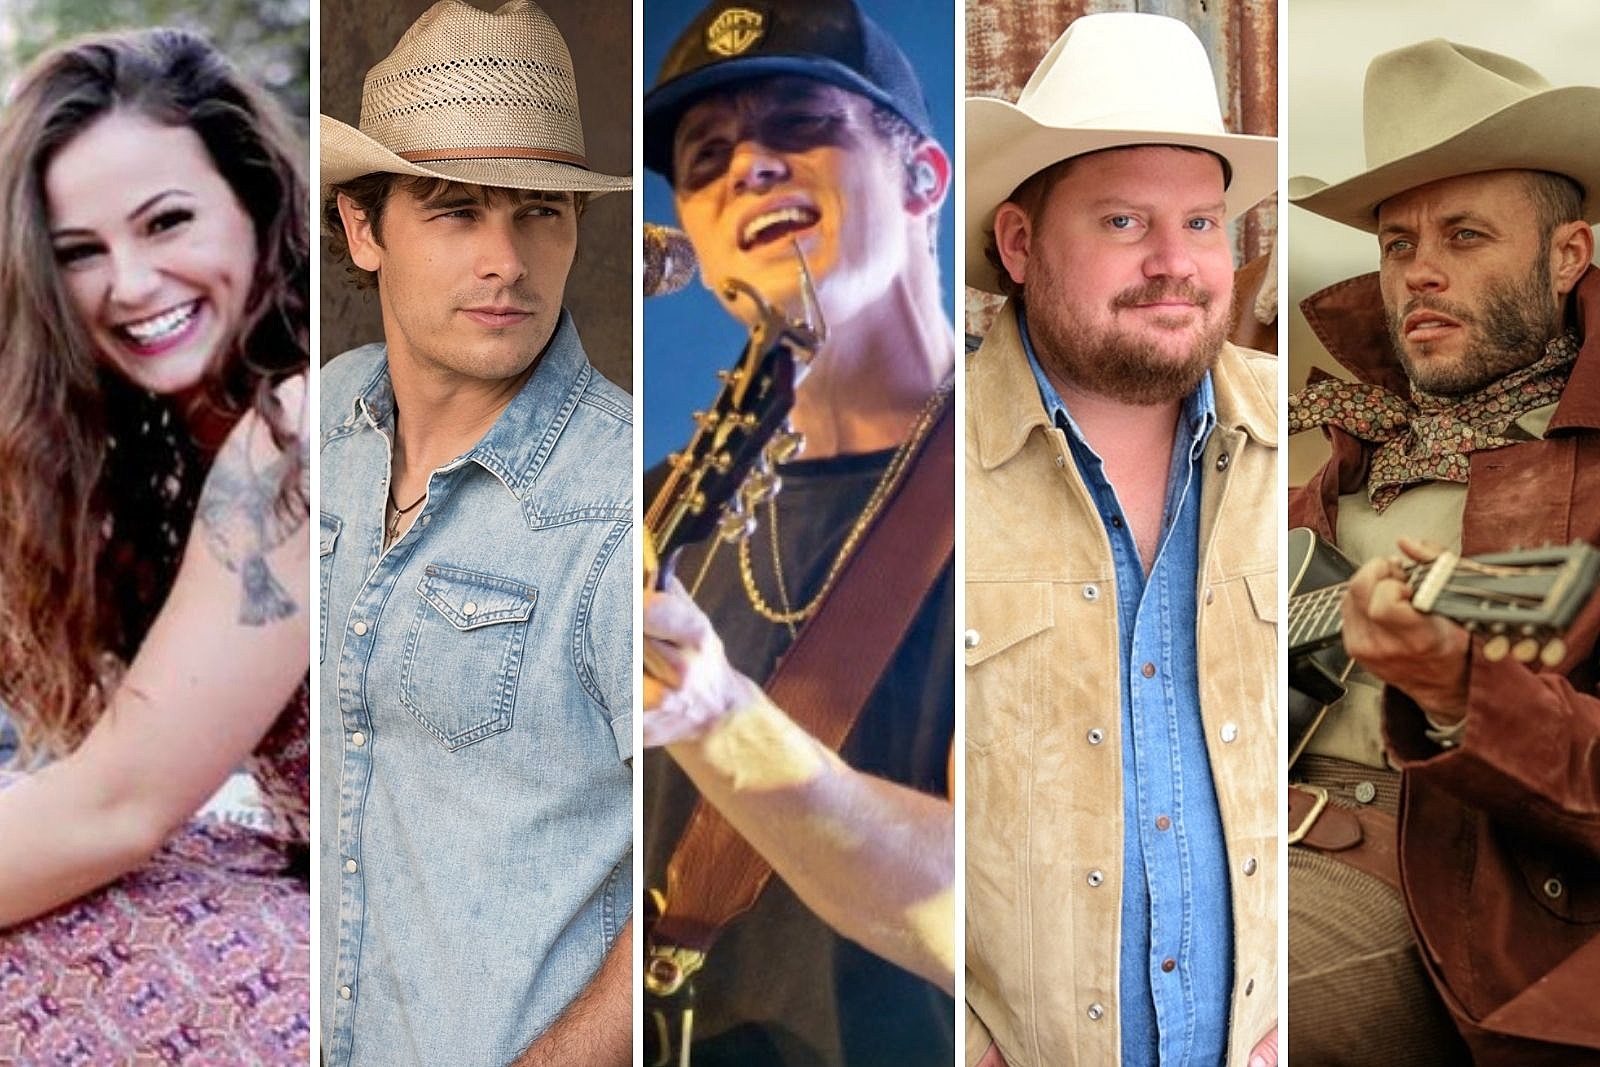 Our 21 Favorite Texas and Red Dirt Singles of 21… So